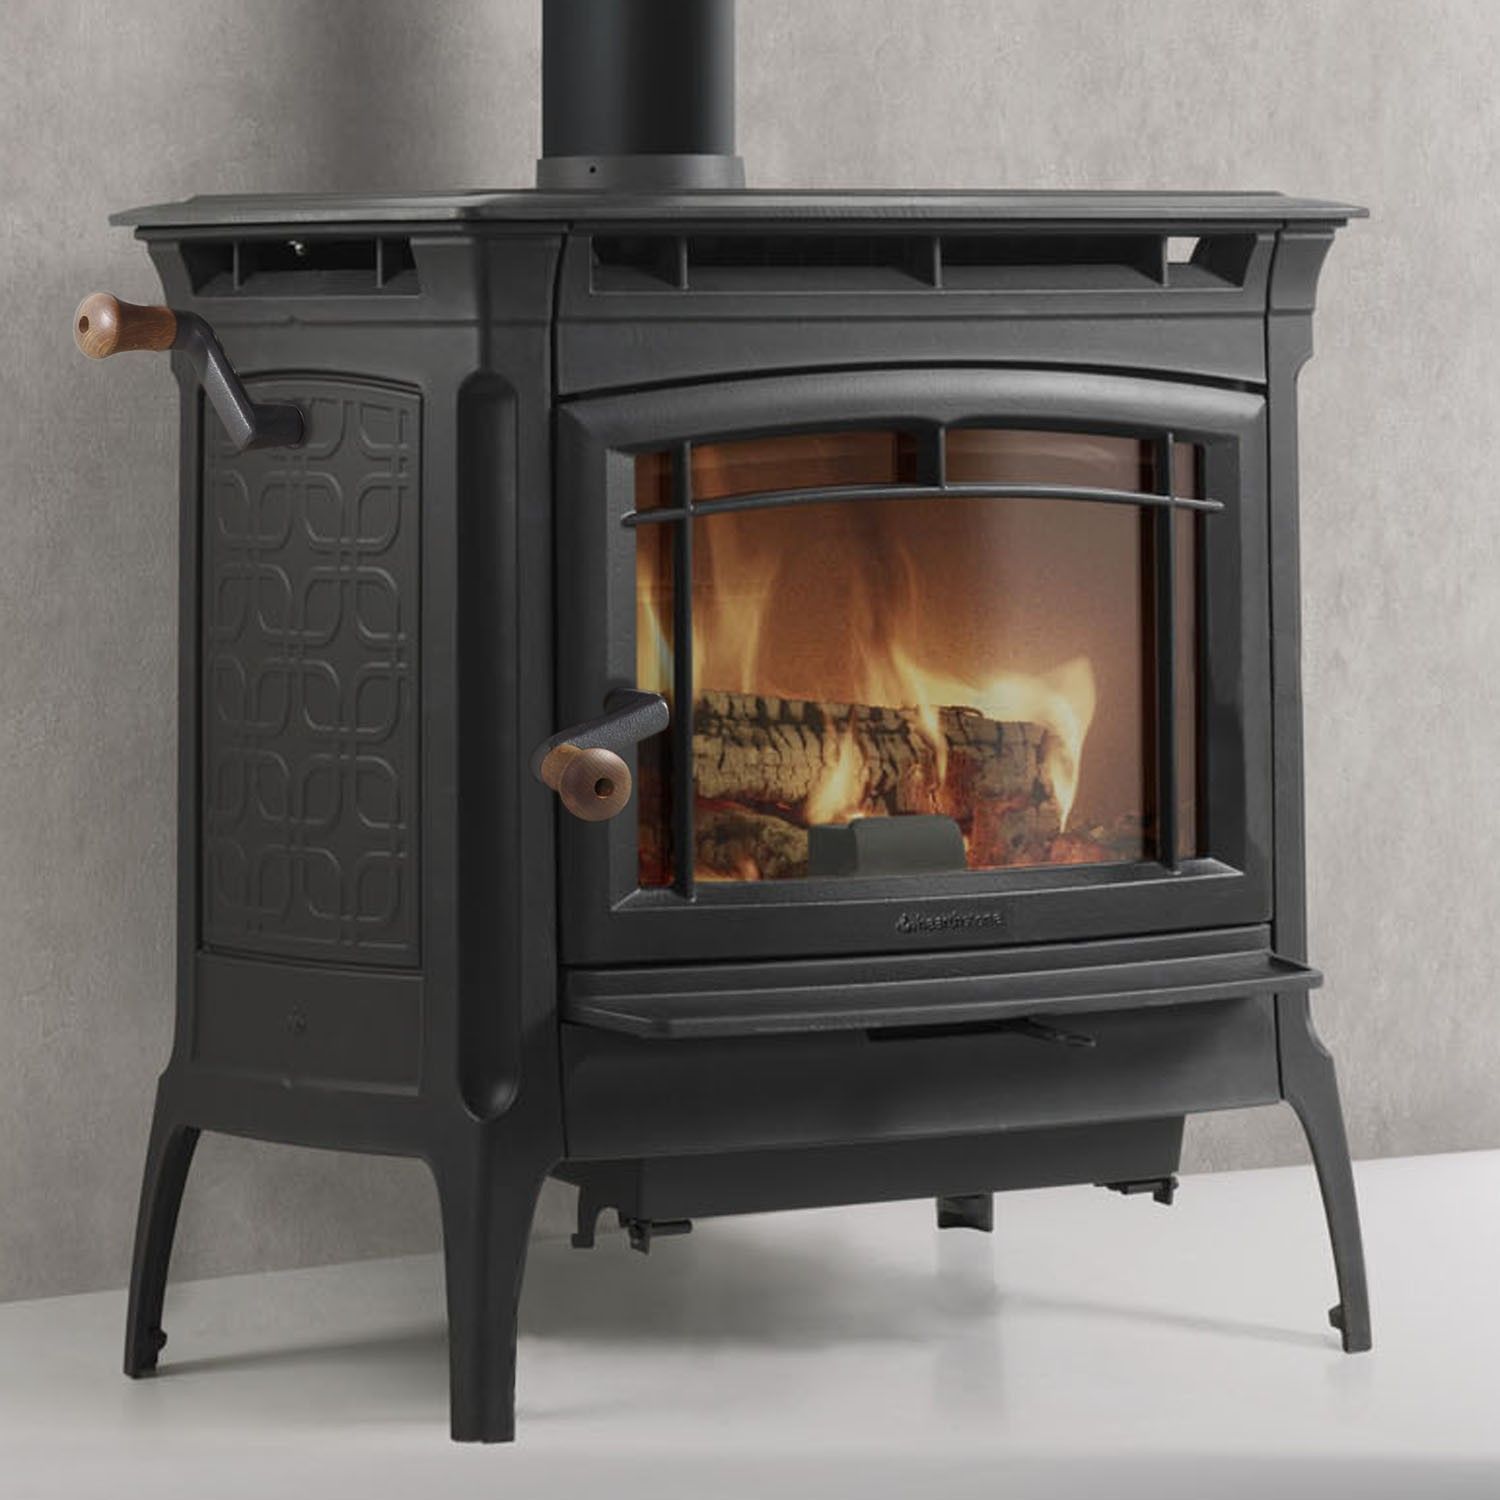 Quadra Fire Fireplace Insert New Pin by Do Wrocklage Harp On Home